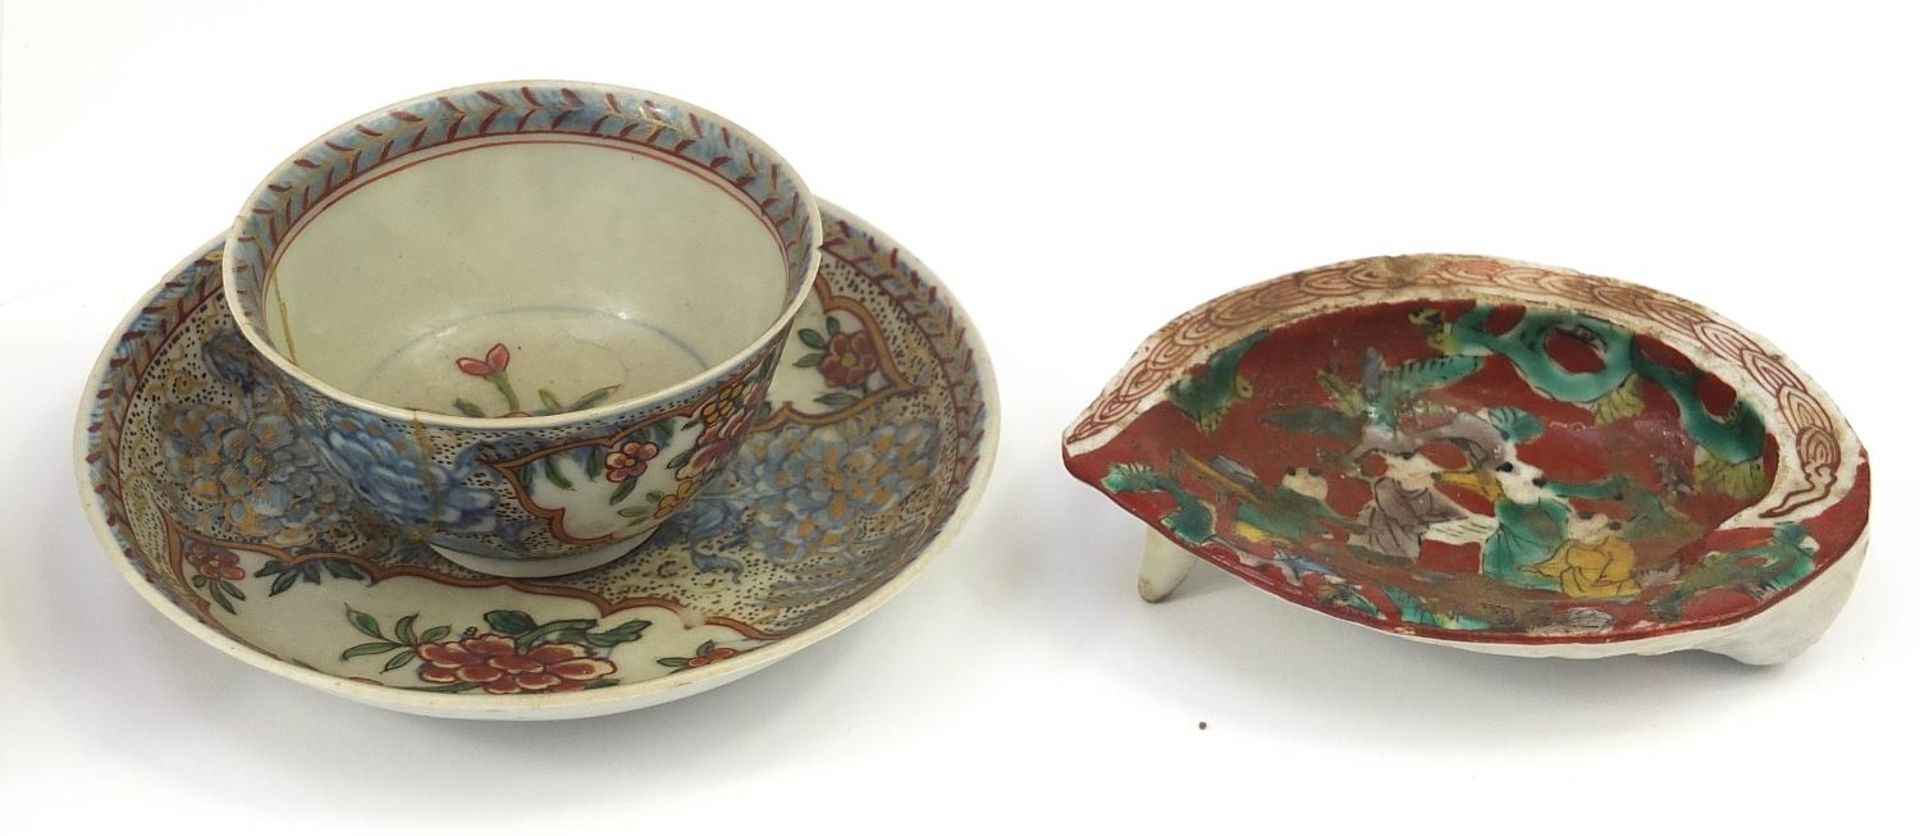 Chinese porcelain including a celadon glazed bowl and sang de boeuf vase, the largest 20.5cm in - Image 4 of 6